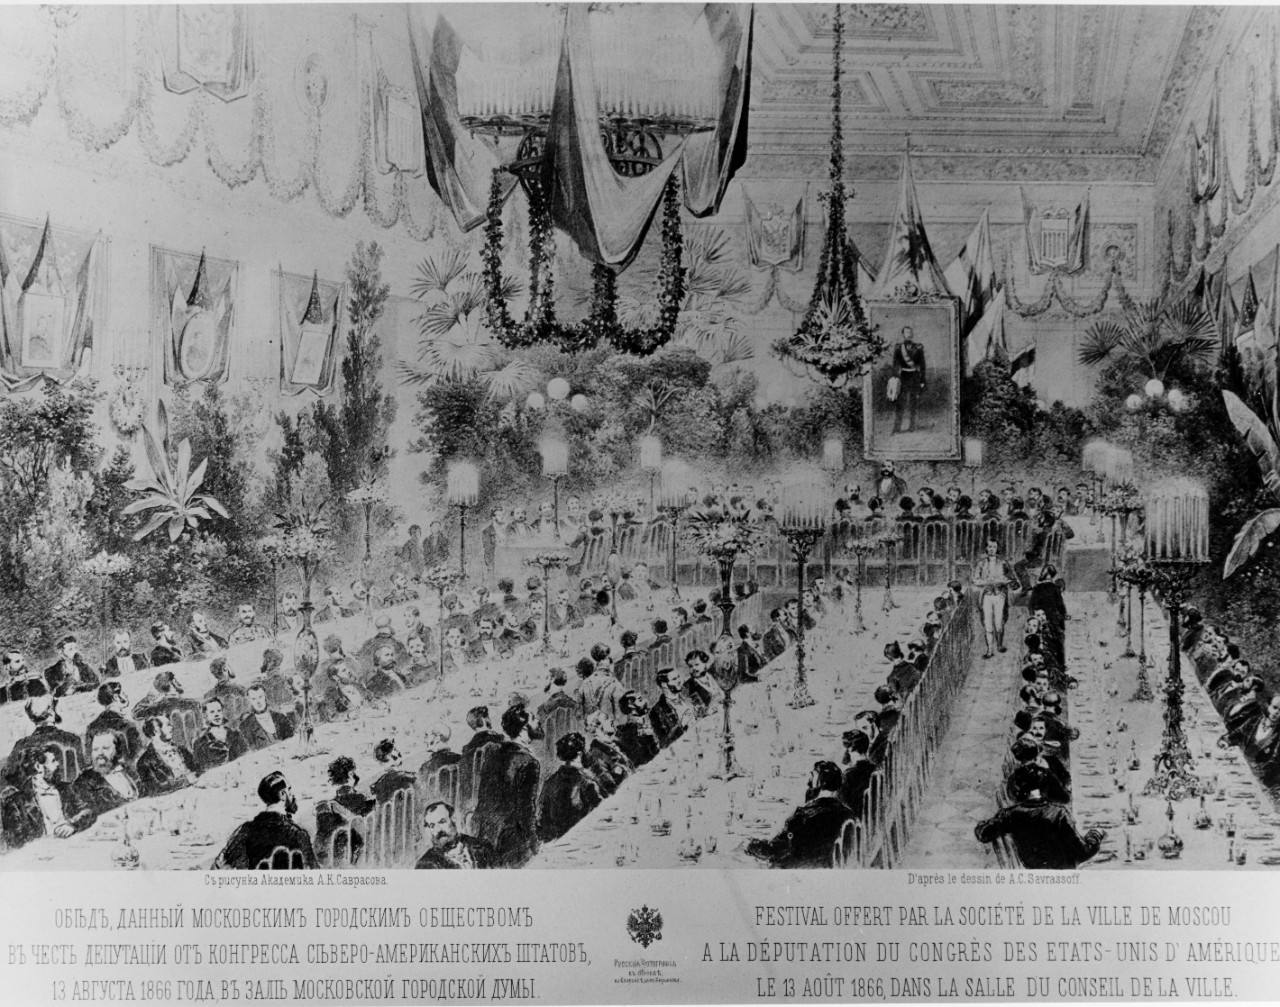 Photo #: NH 76538  Banquet in Moscow, Russia, 13 (25) August 1866